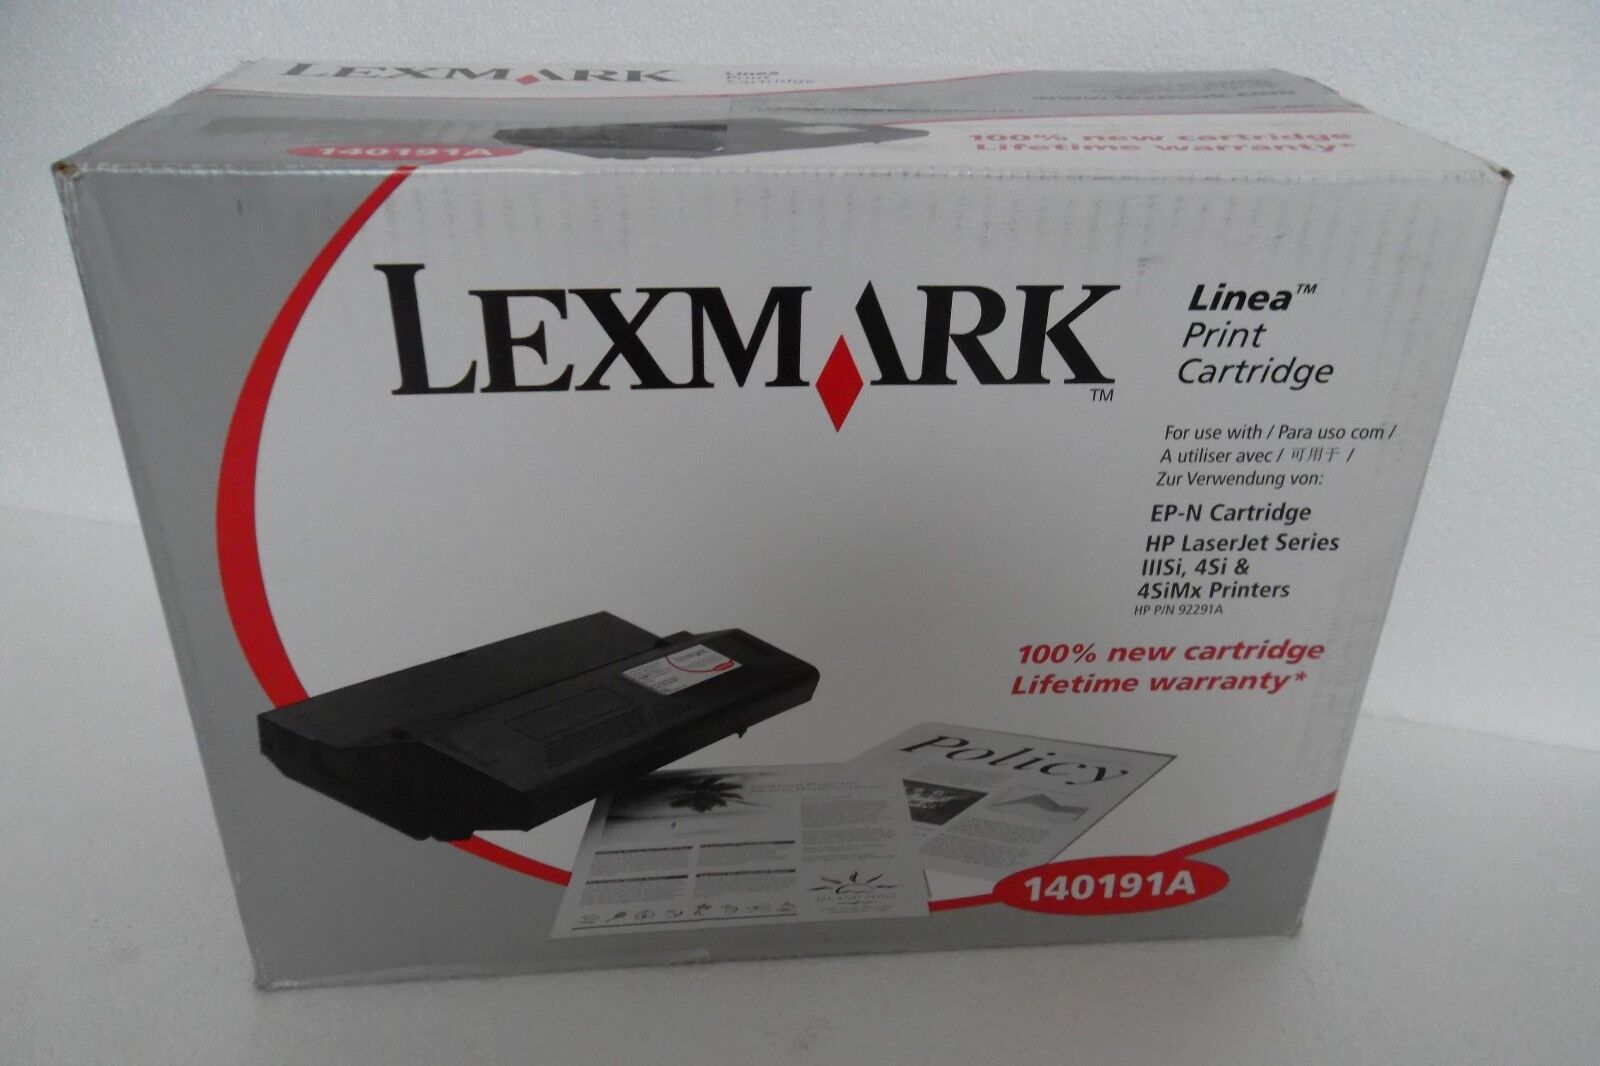 Lexmark Toner Cartridge Blk  10K Yield for HP 92291A 4si IIISi 4SiMx 140191A NEW